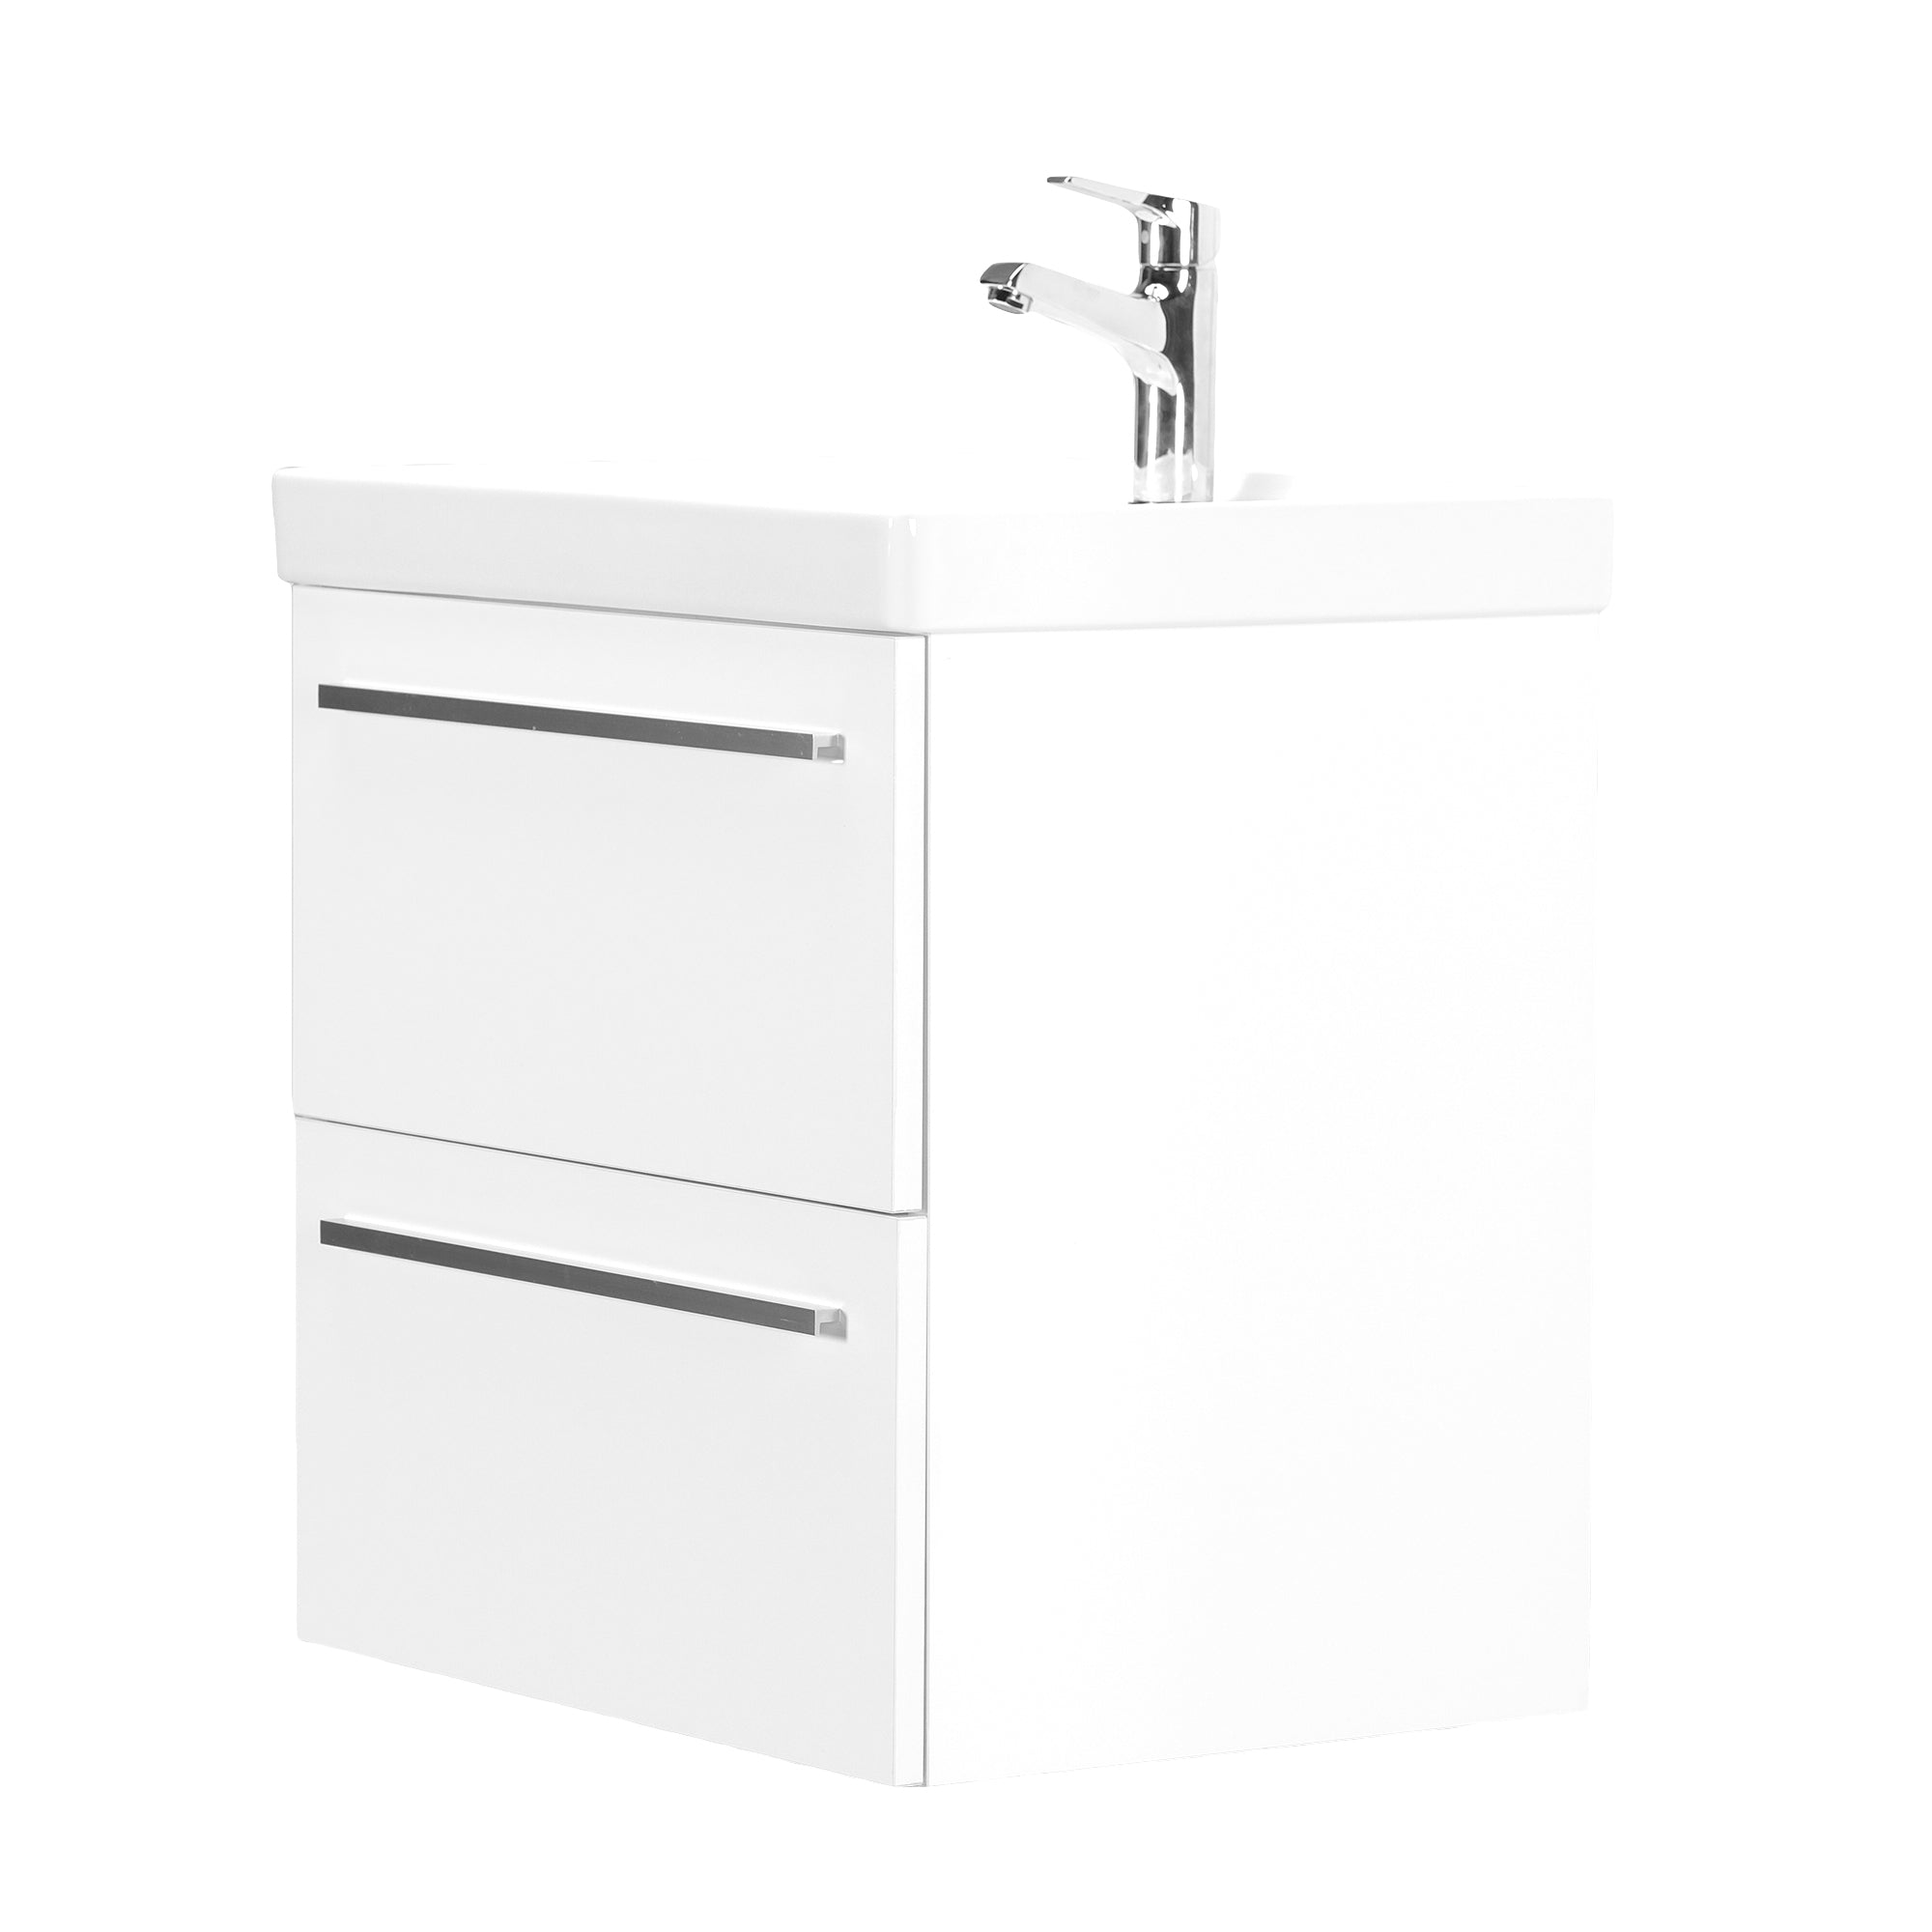 FIORE 24 INCH MODERN WALL MOUNT VANITY AND SINK COMBO - GLOSSY WHITE